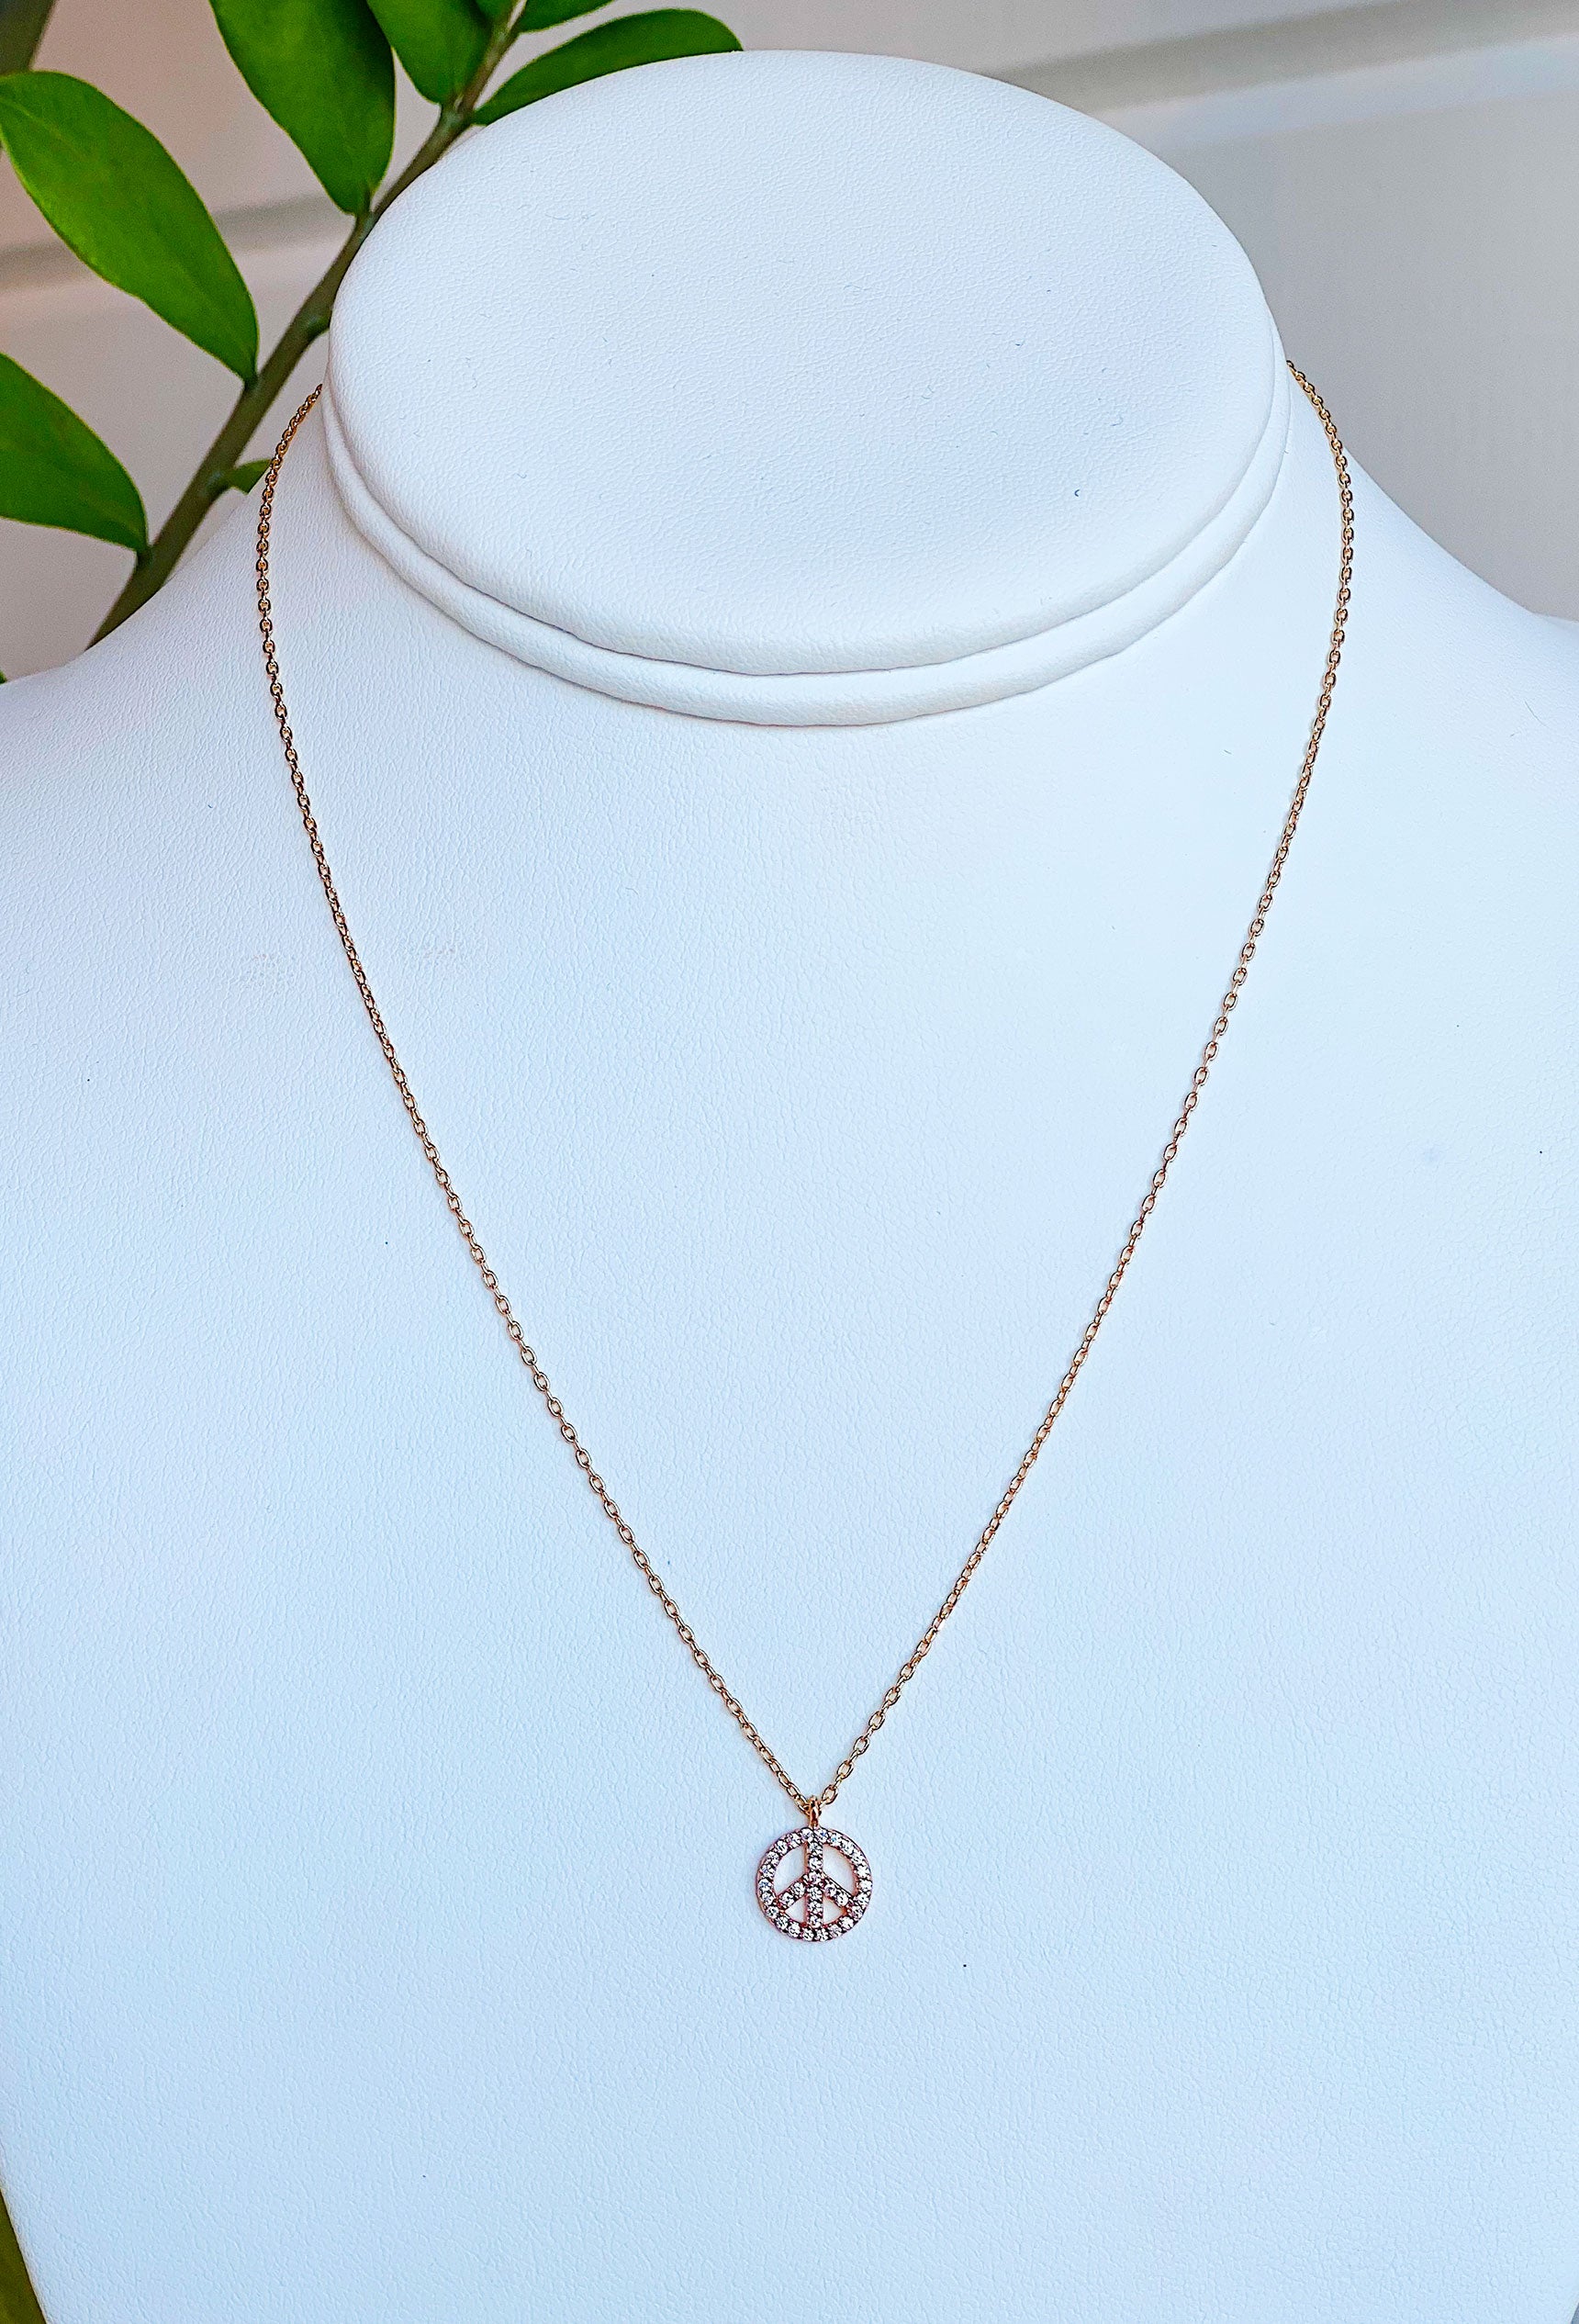 Keep the Peace Dainty Necklace, gold dainty peace sign necklace